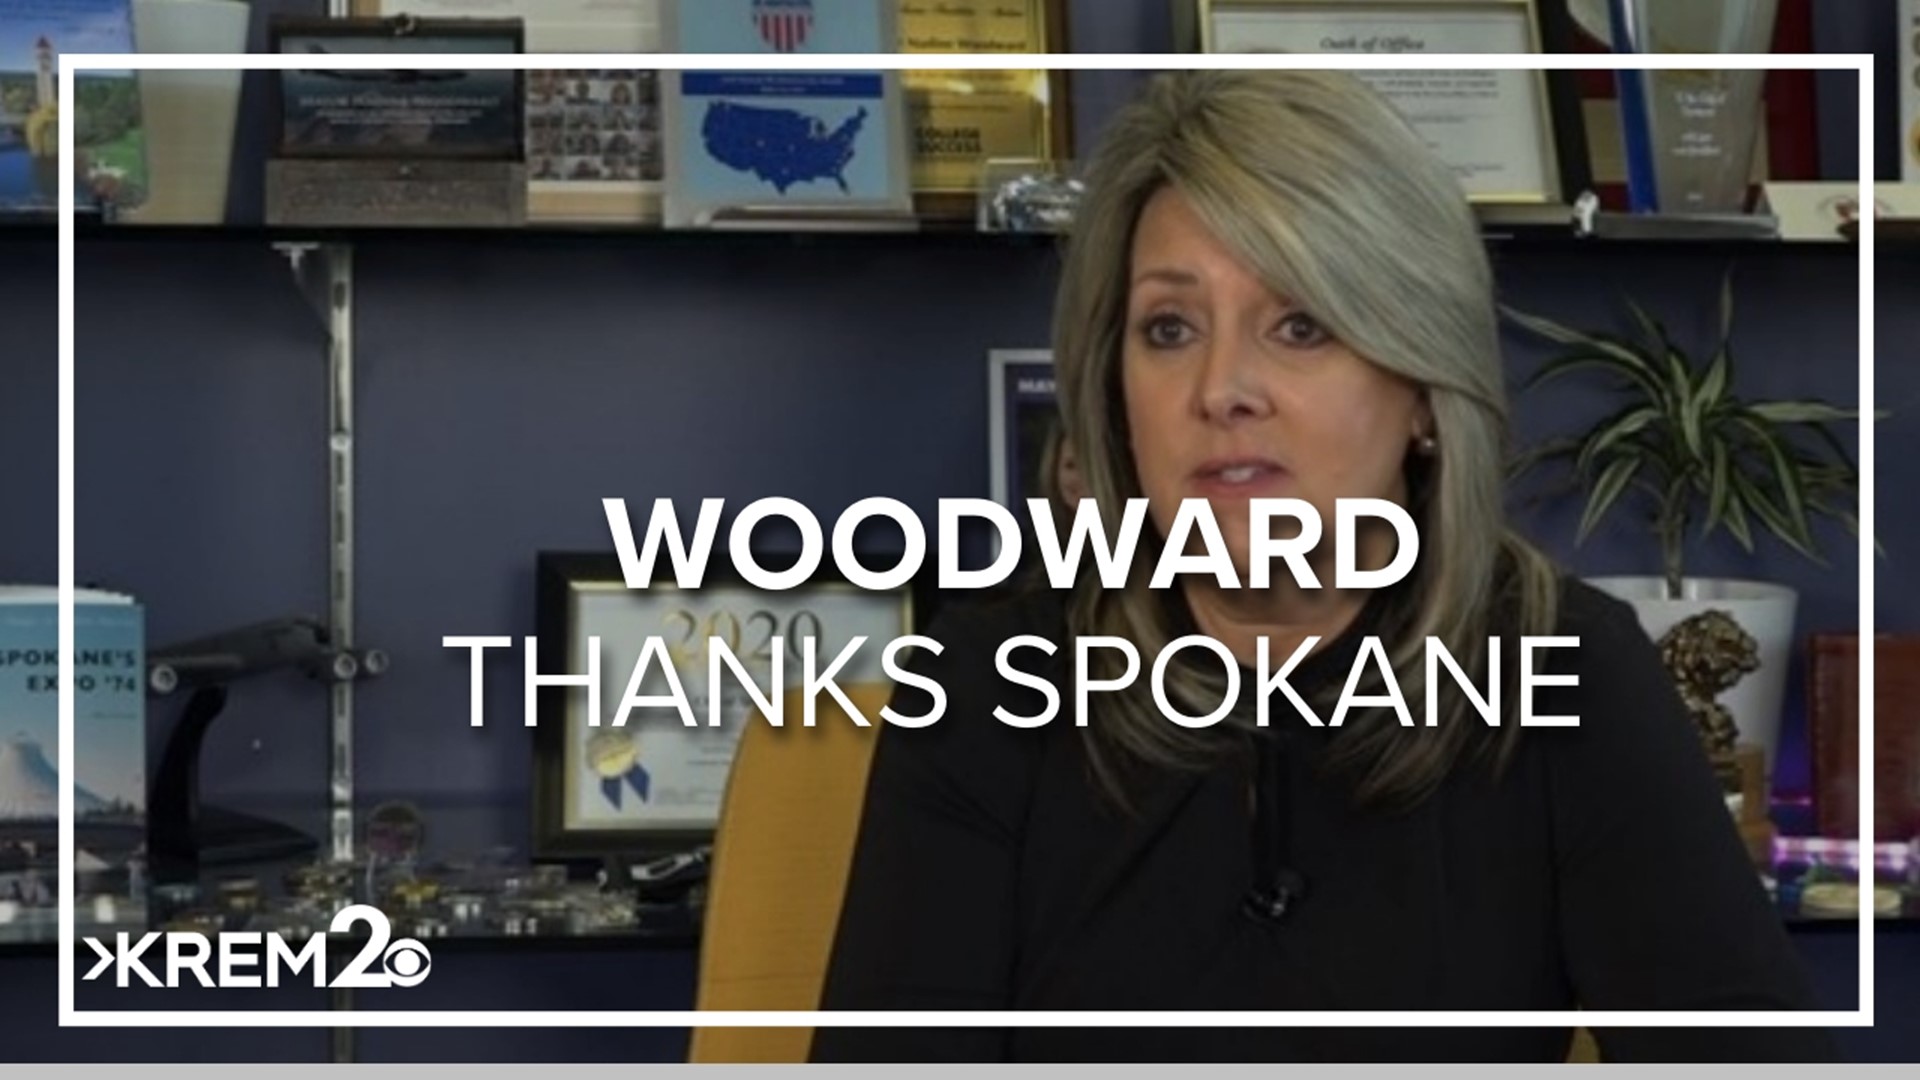 Mayor Woodward looks back on her four years as mayor proudly. She says there is still work to be done before she leaves office.